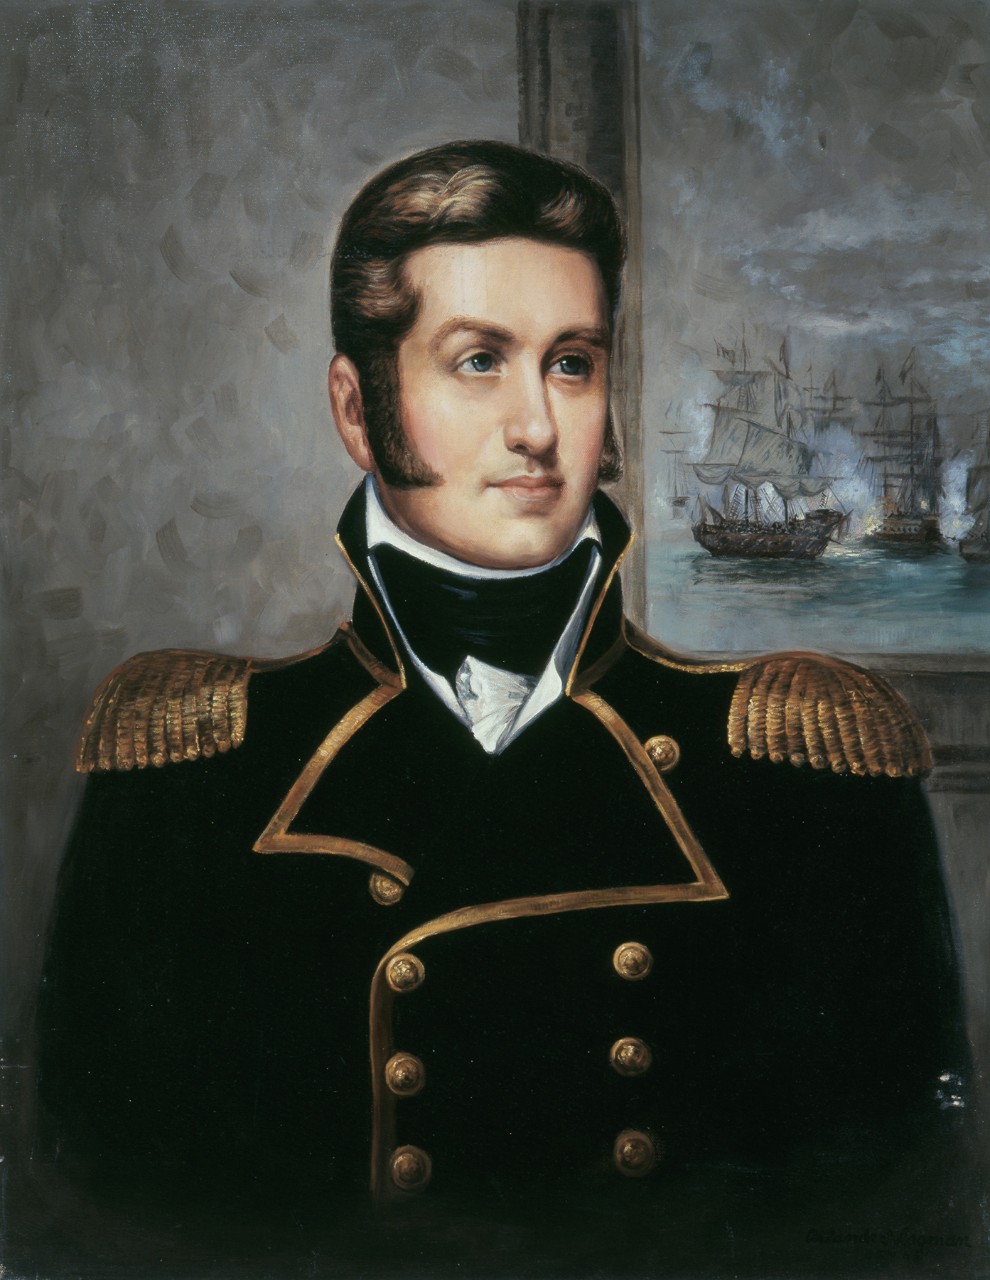 Portrait of Commodore Thomas Macdonough in a room with a window that looks onto a harbor with ships